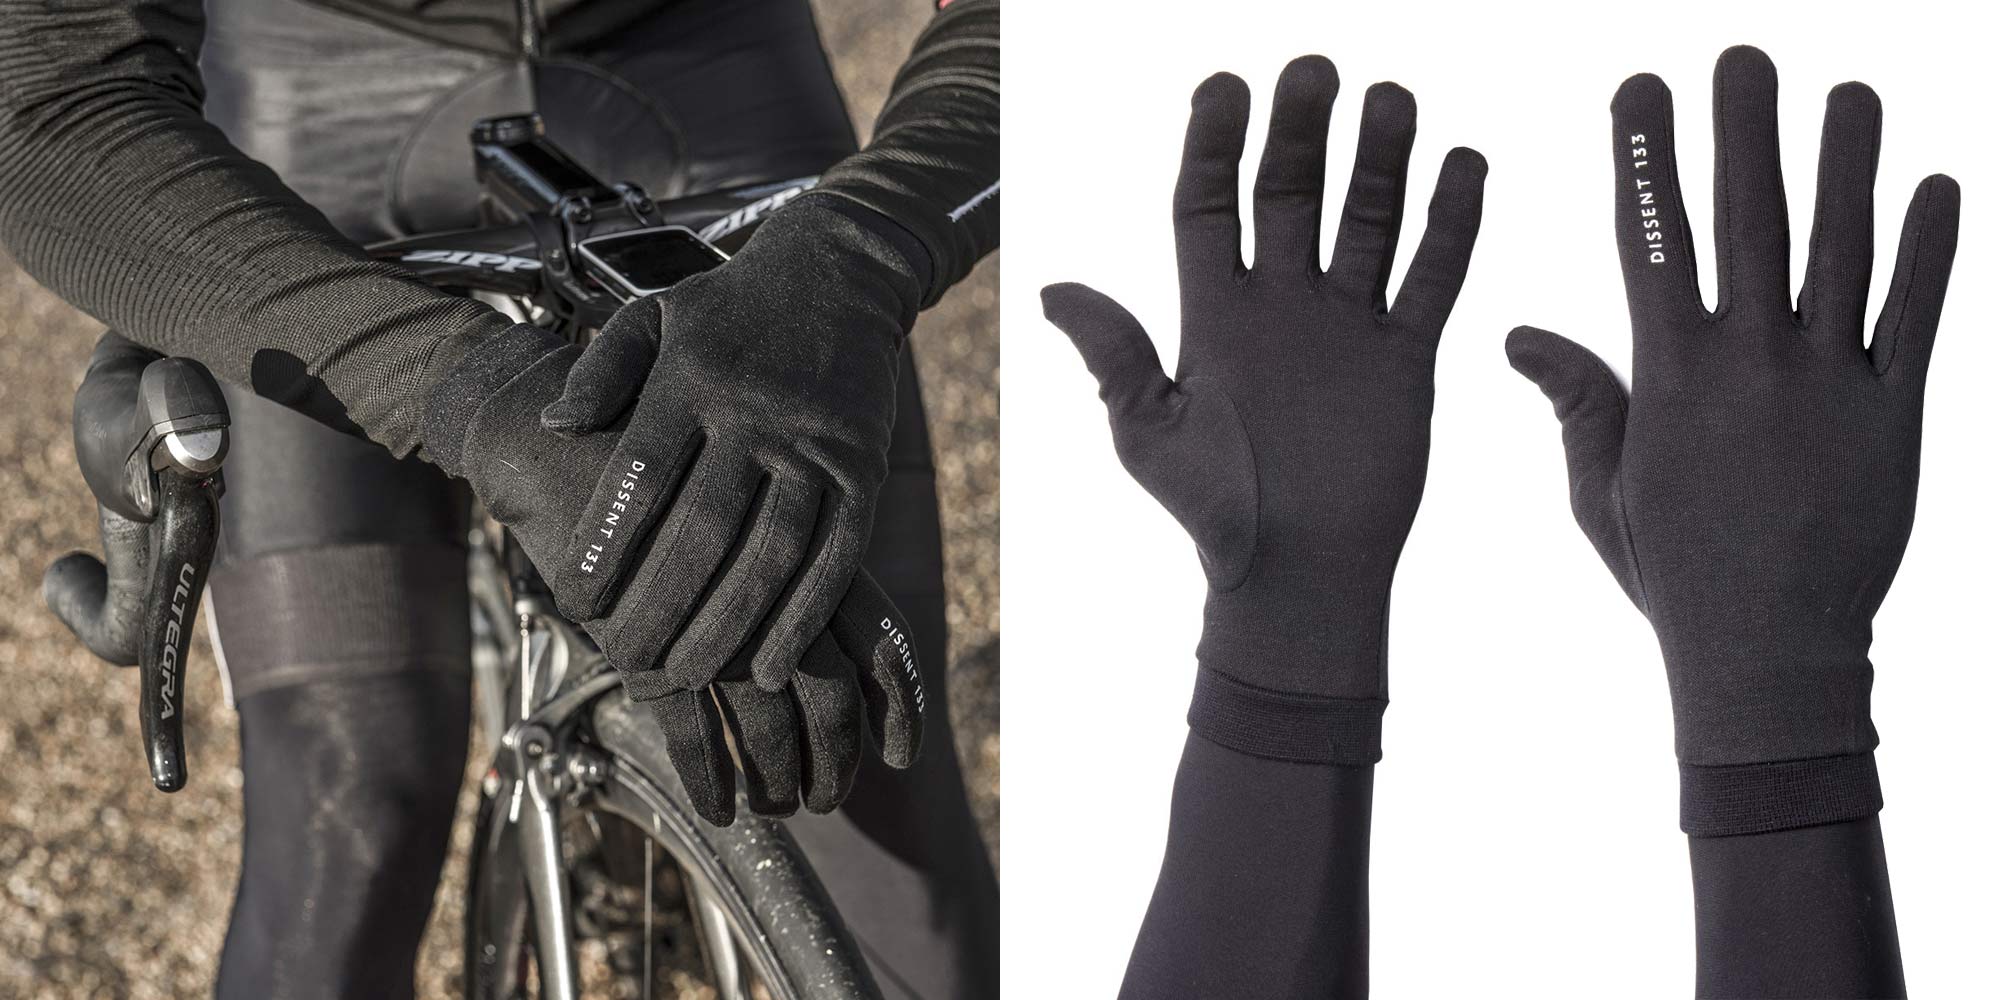 Dissent 133 by TheRiderFirm layered winter biking gloves wet cold cycling glove system silk insulating liner glove